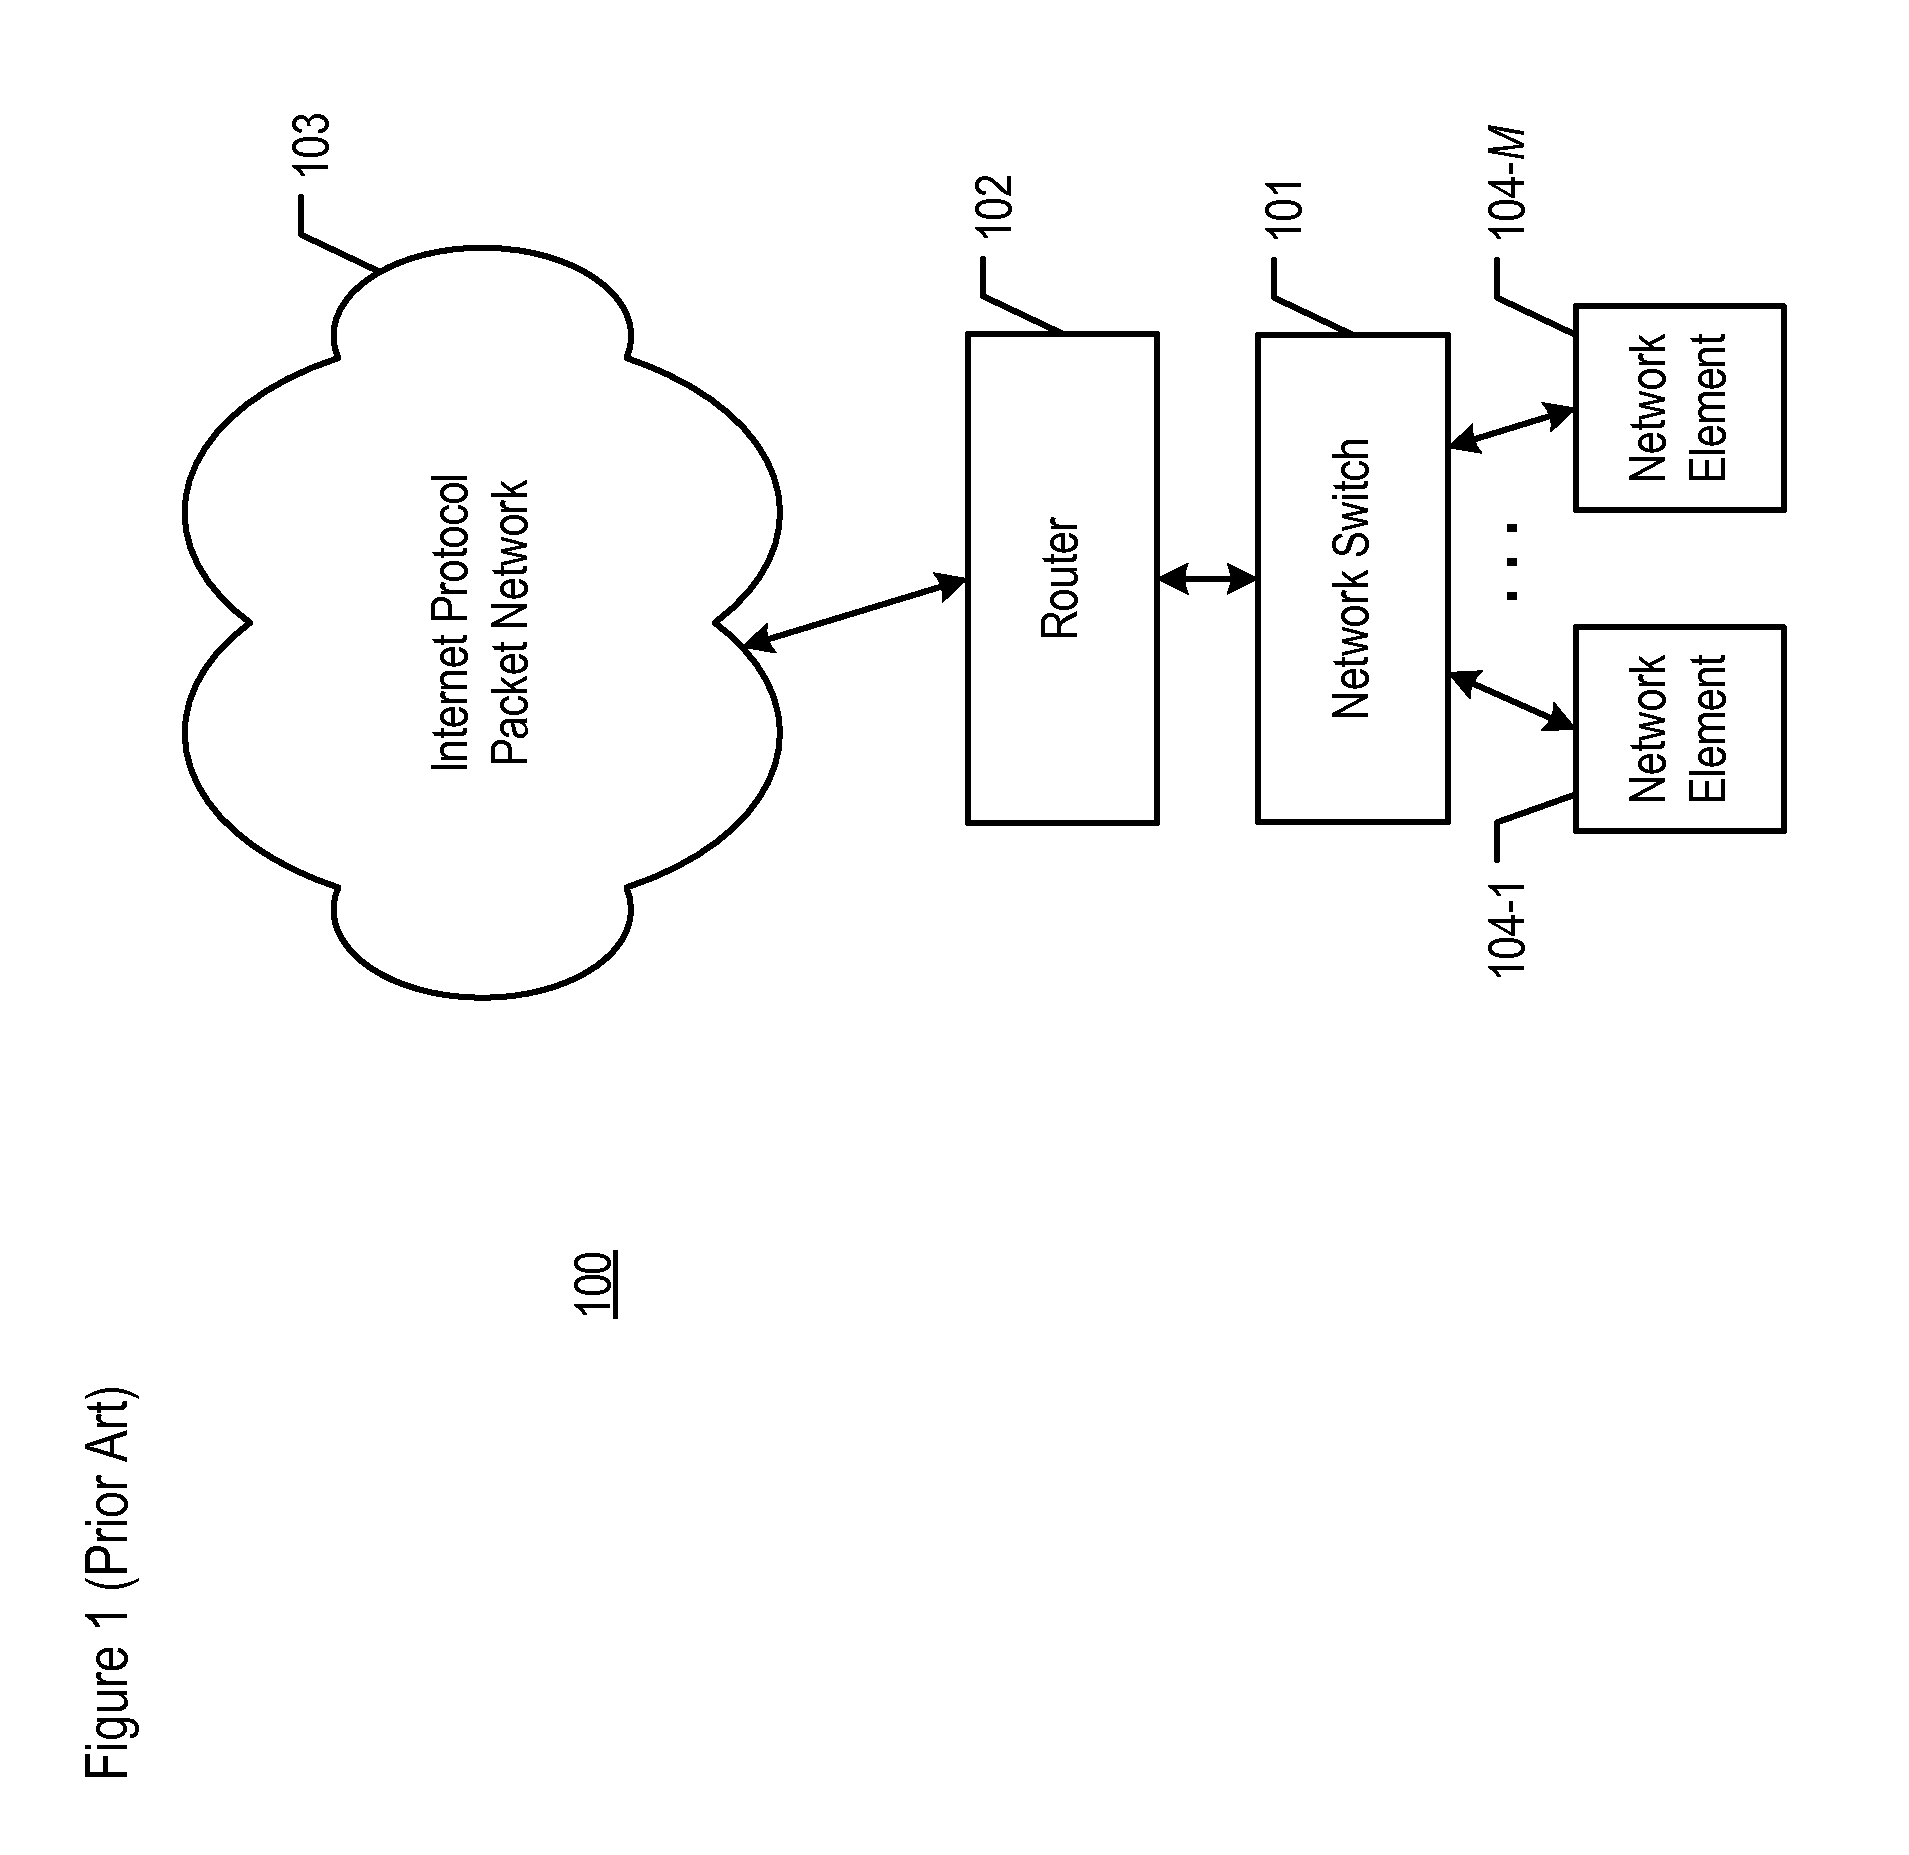 Network switch that is optimized for a telephony-capable endpoint